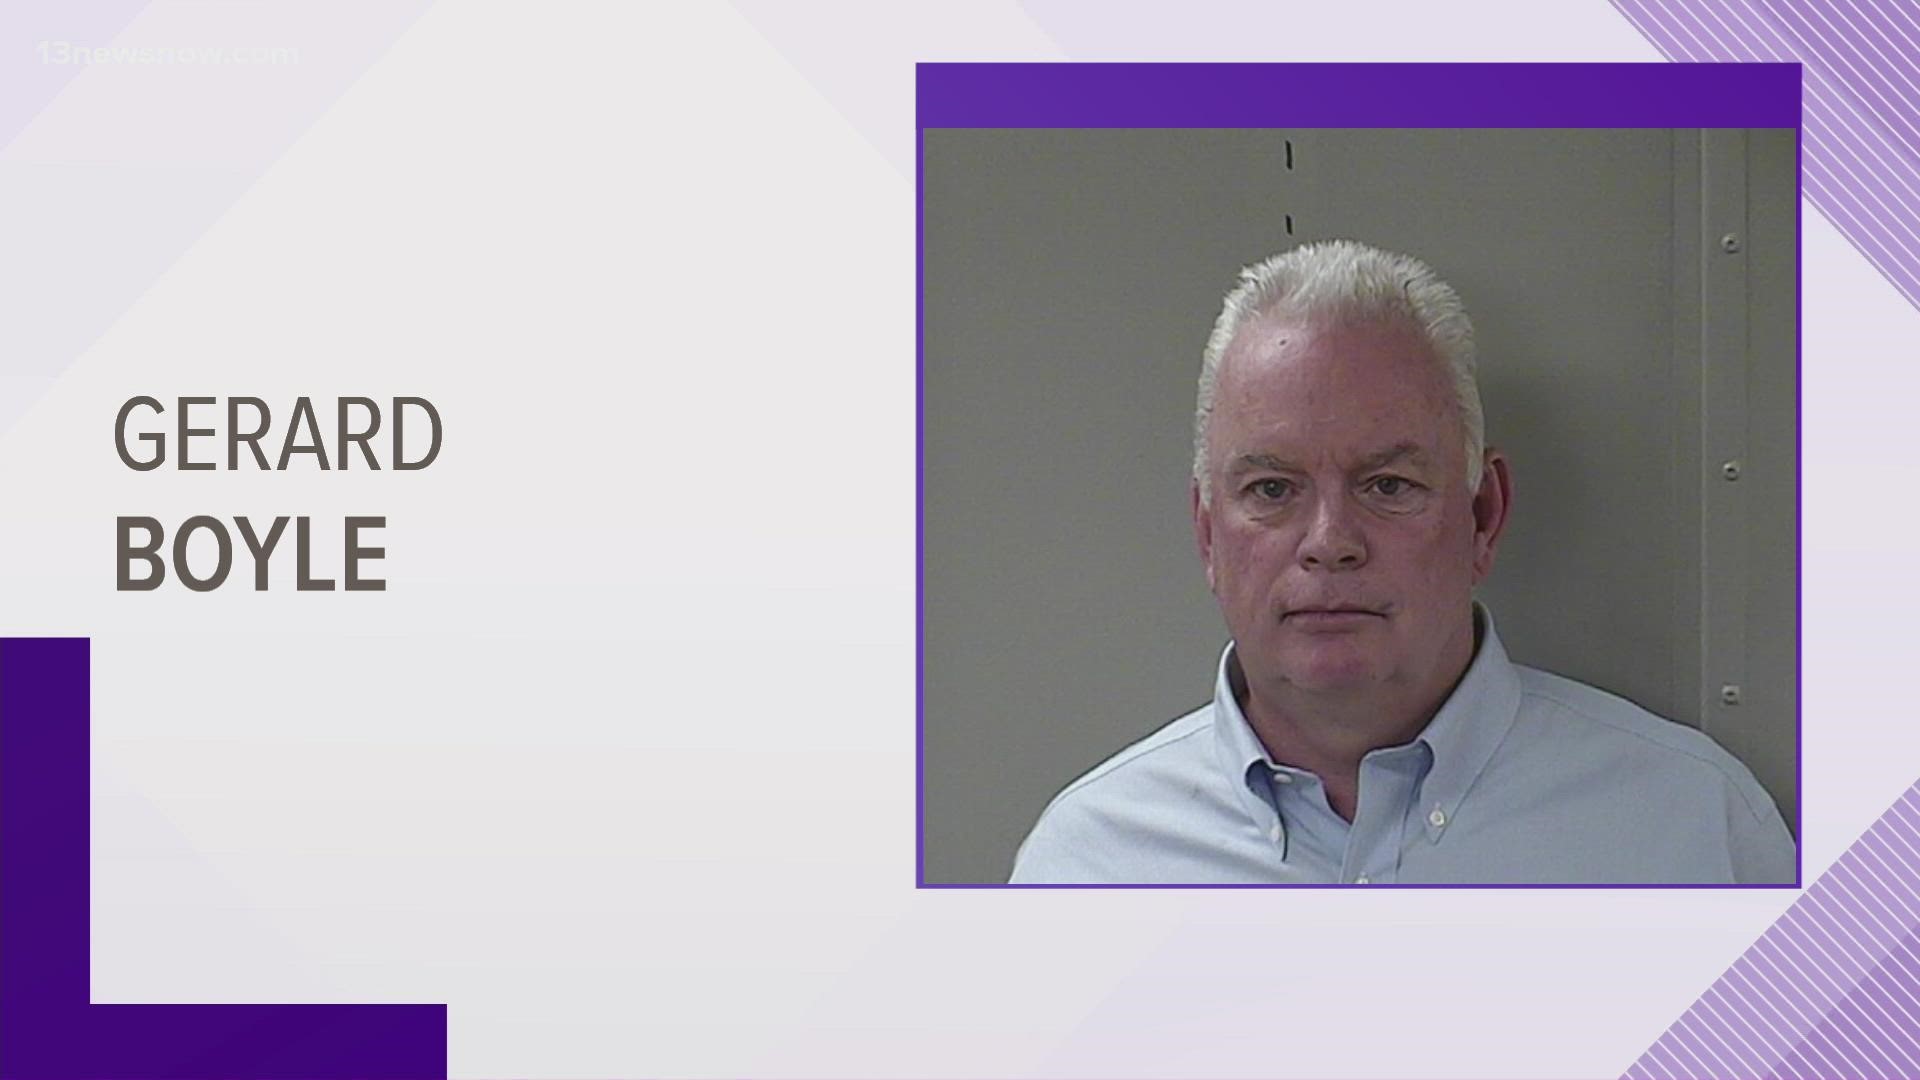 Gerard Boyle pleaded guilty to committing mail fraud as part of his actions in providing money and other goods to former Norfolk Sheriff Bob McCabe.